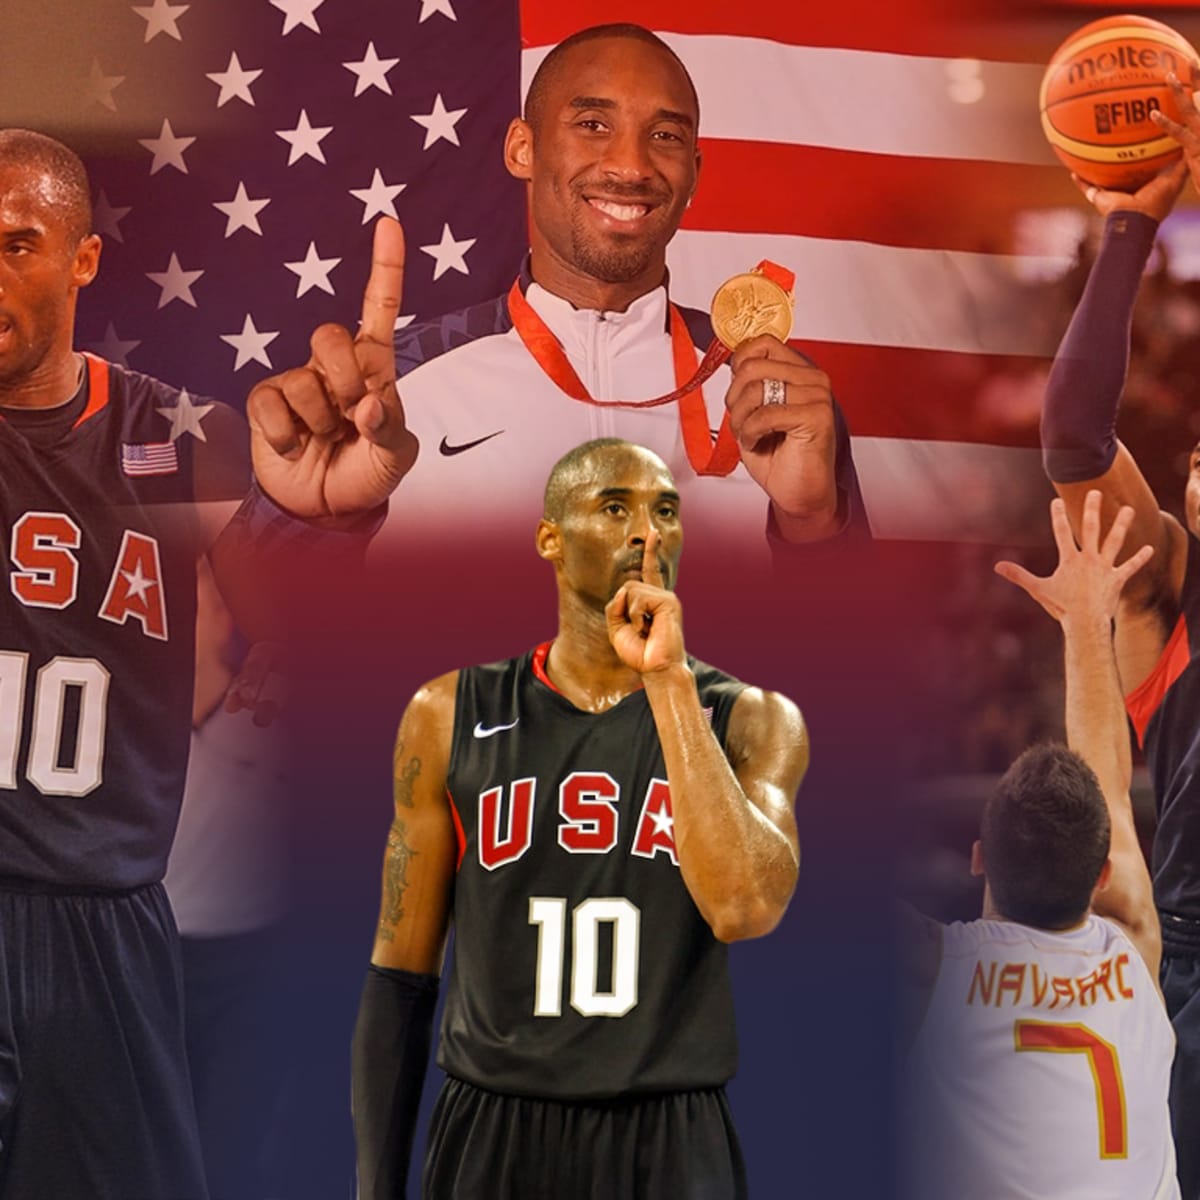 USA's Kobe Bryant holds up his USA jersey as he celebrates a win over Spain  to claim the gold medal for Men's Basketball during the 2008 Summer Olympics  in Beijing on August